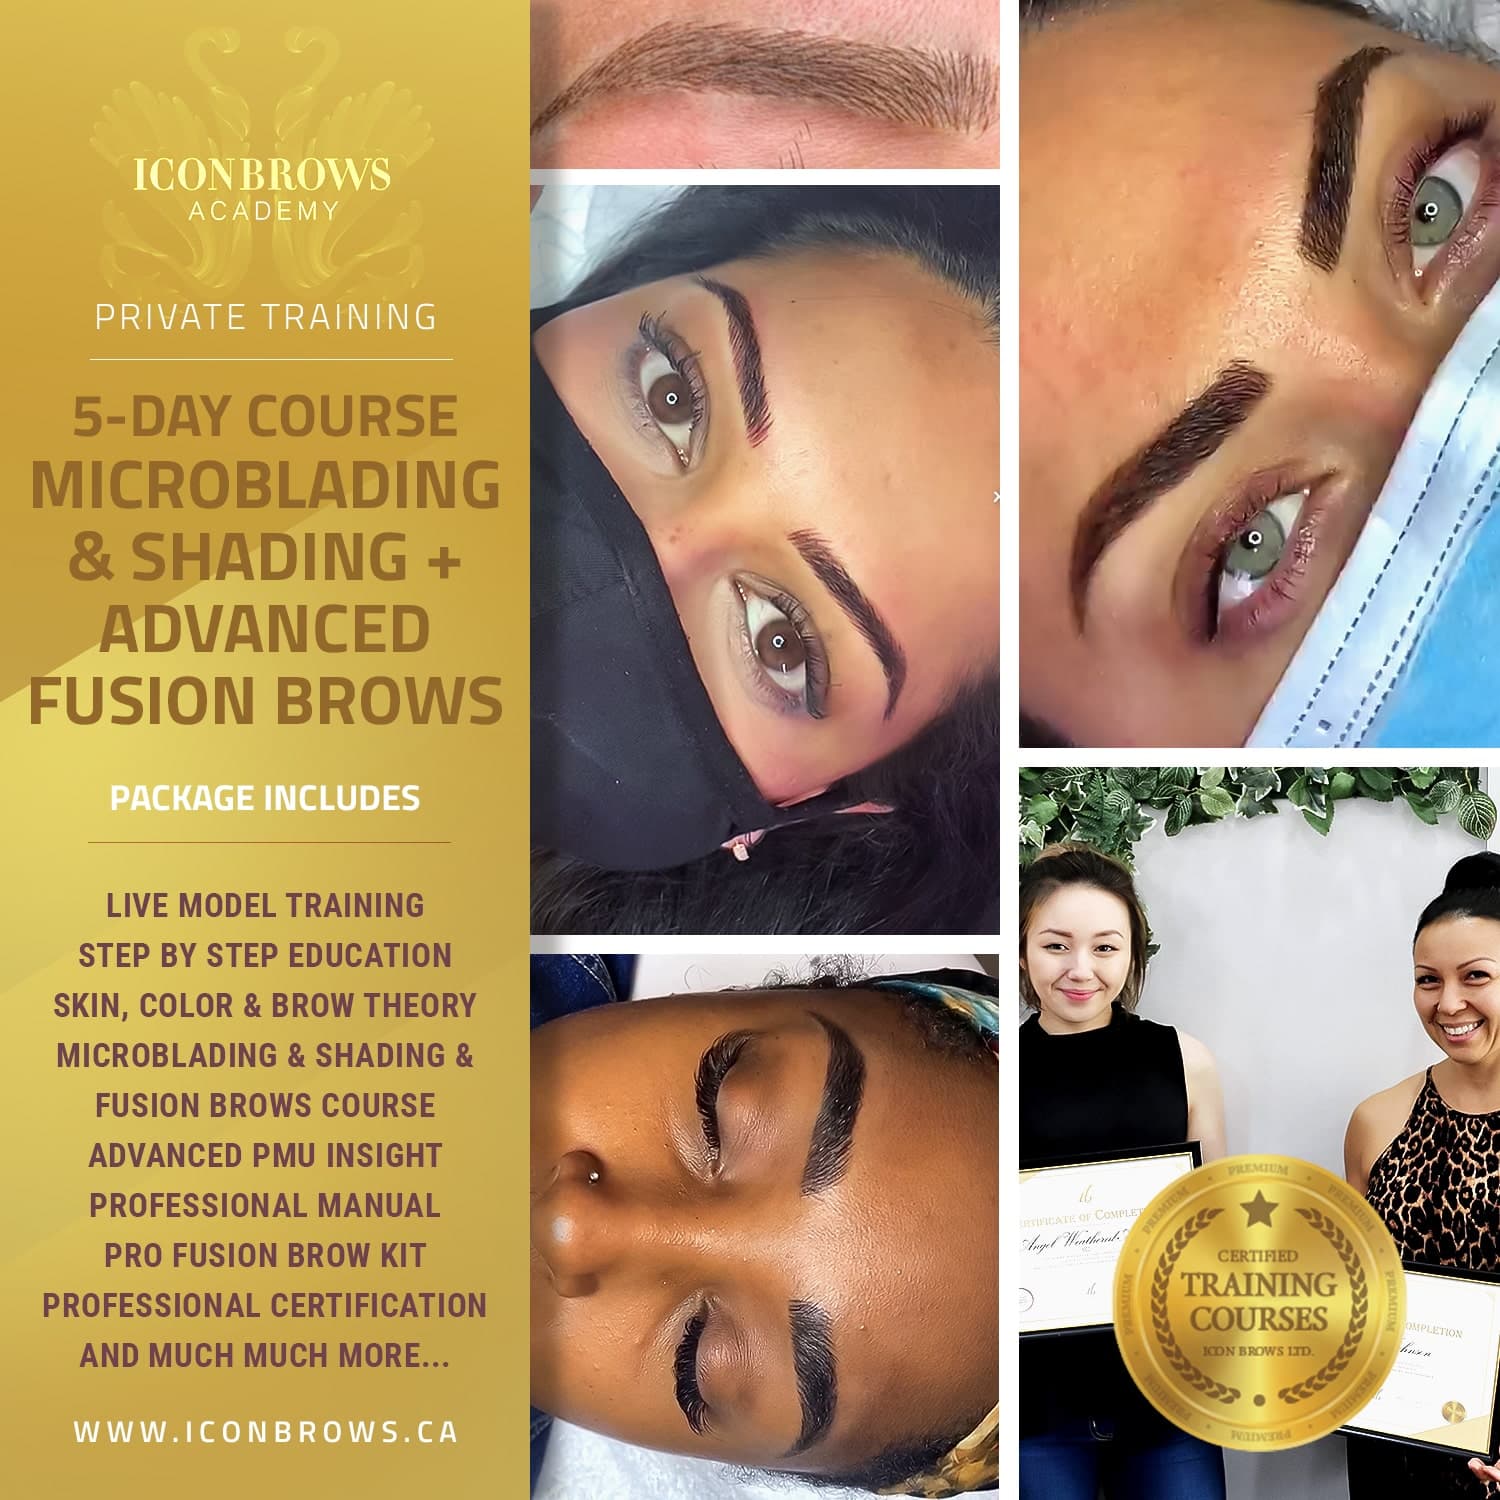 5 Day Microblading Shading Fusion Brows Training Course with Iconbrows Academy Toronto's Top Brow & Lash Training Courses